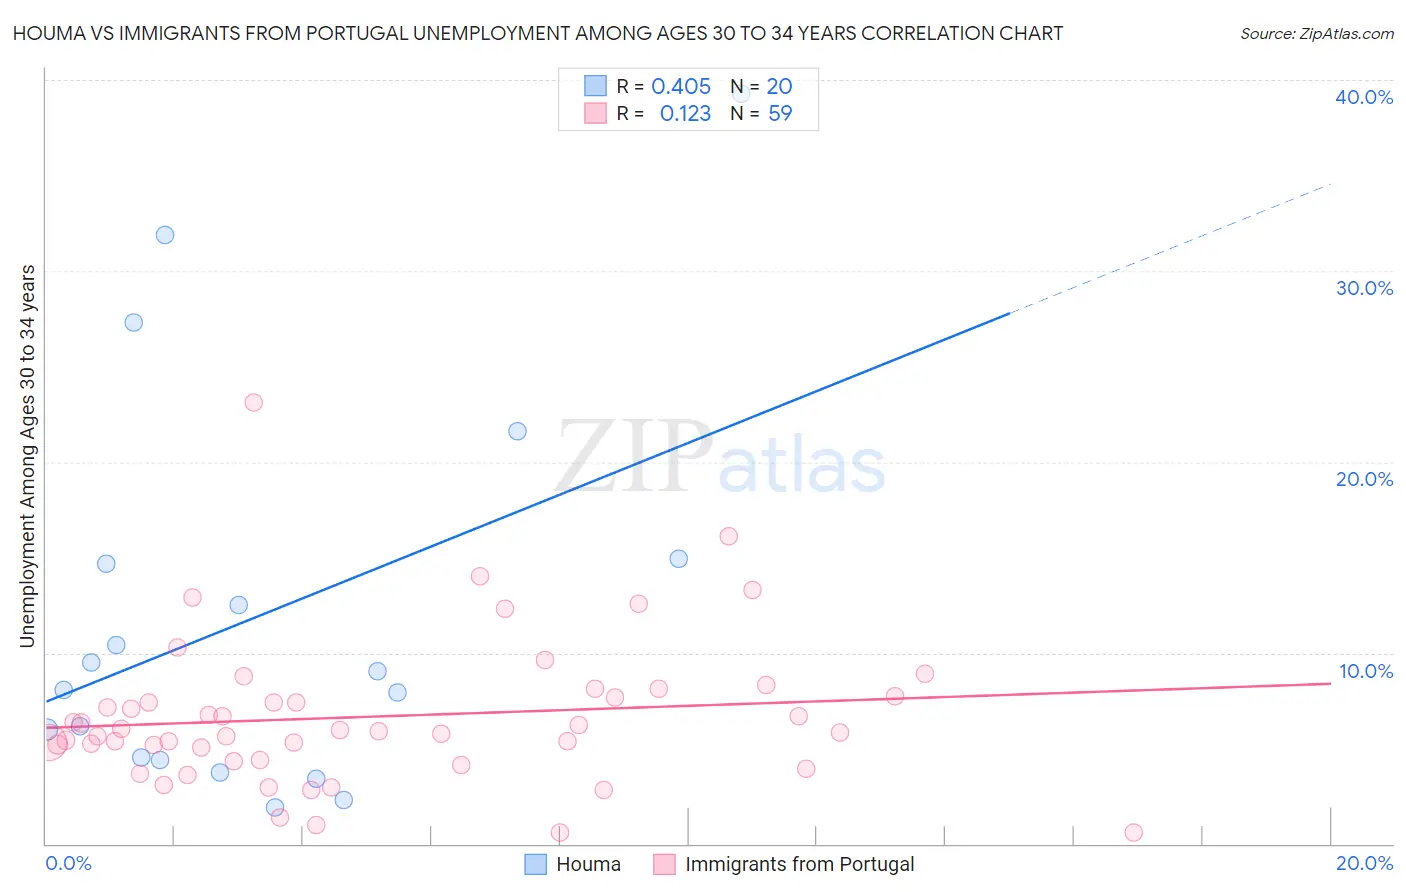 Houma vs Immigrants from Portugal Unemployment Among Ages 30 to 34 years